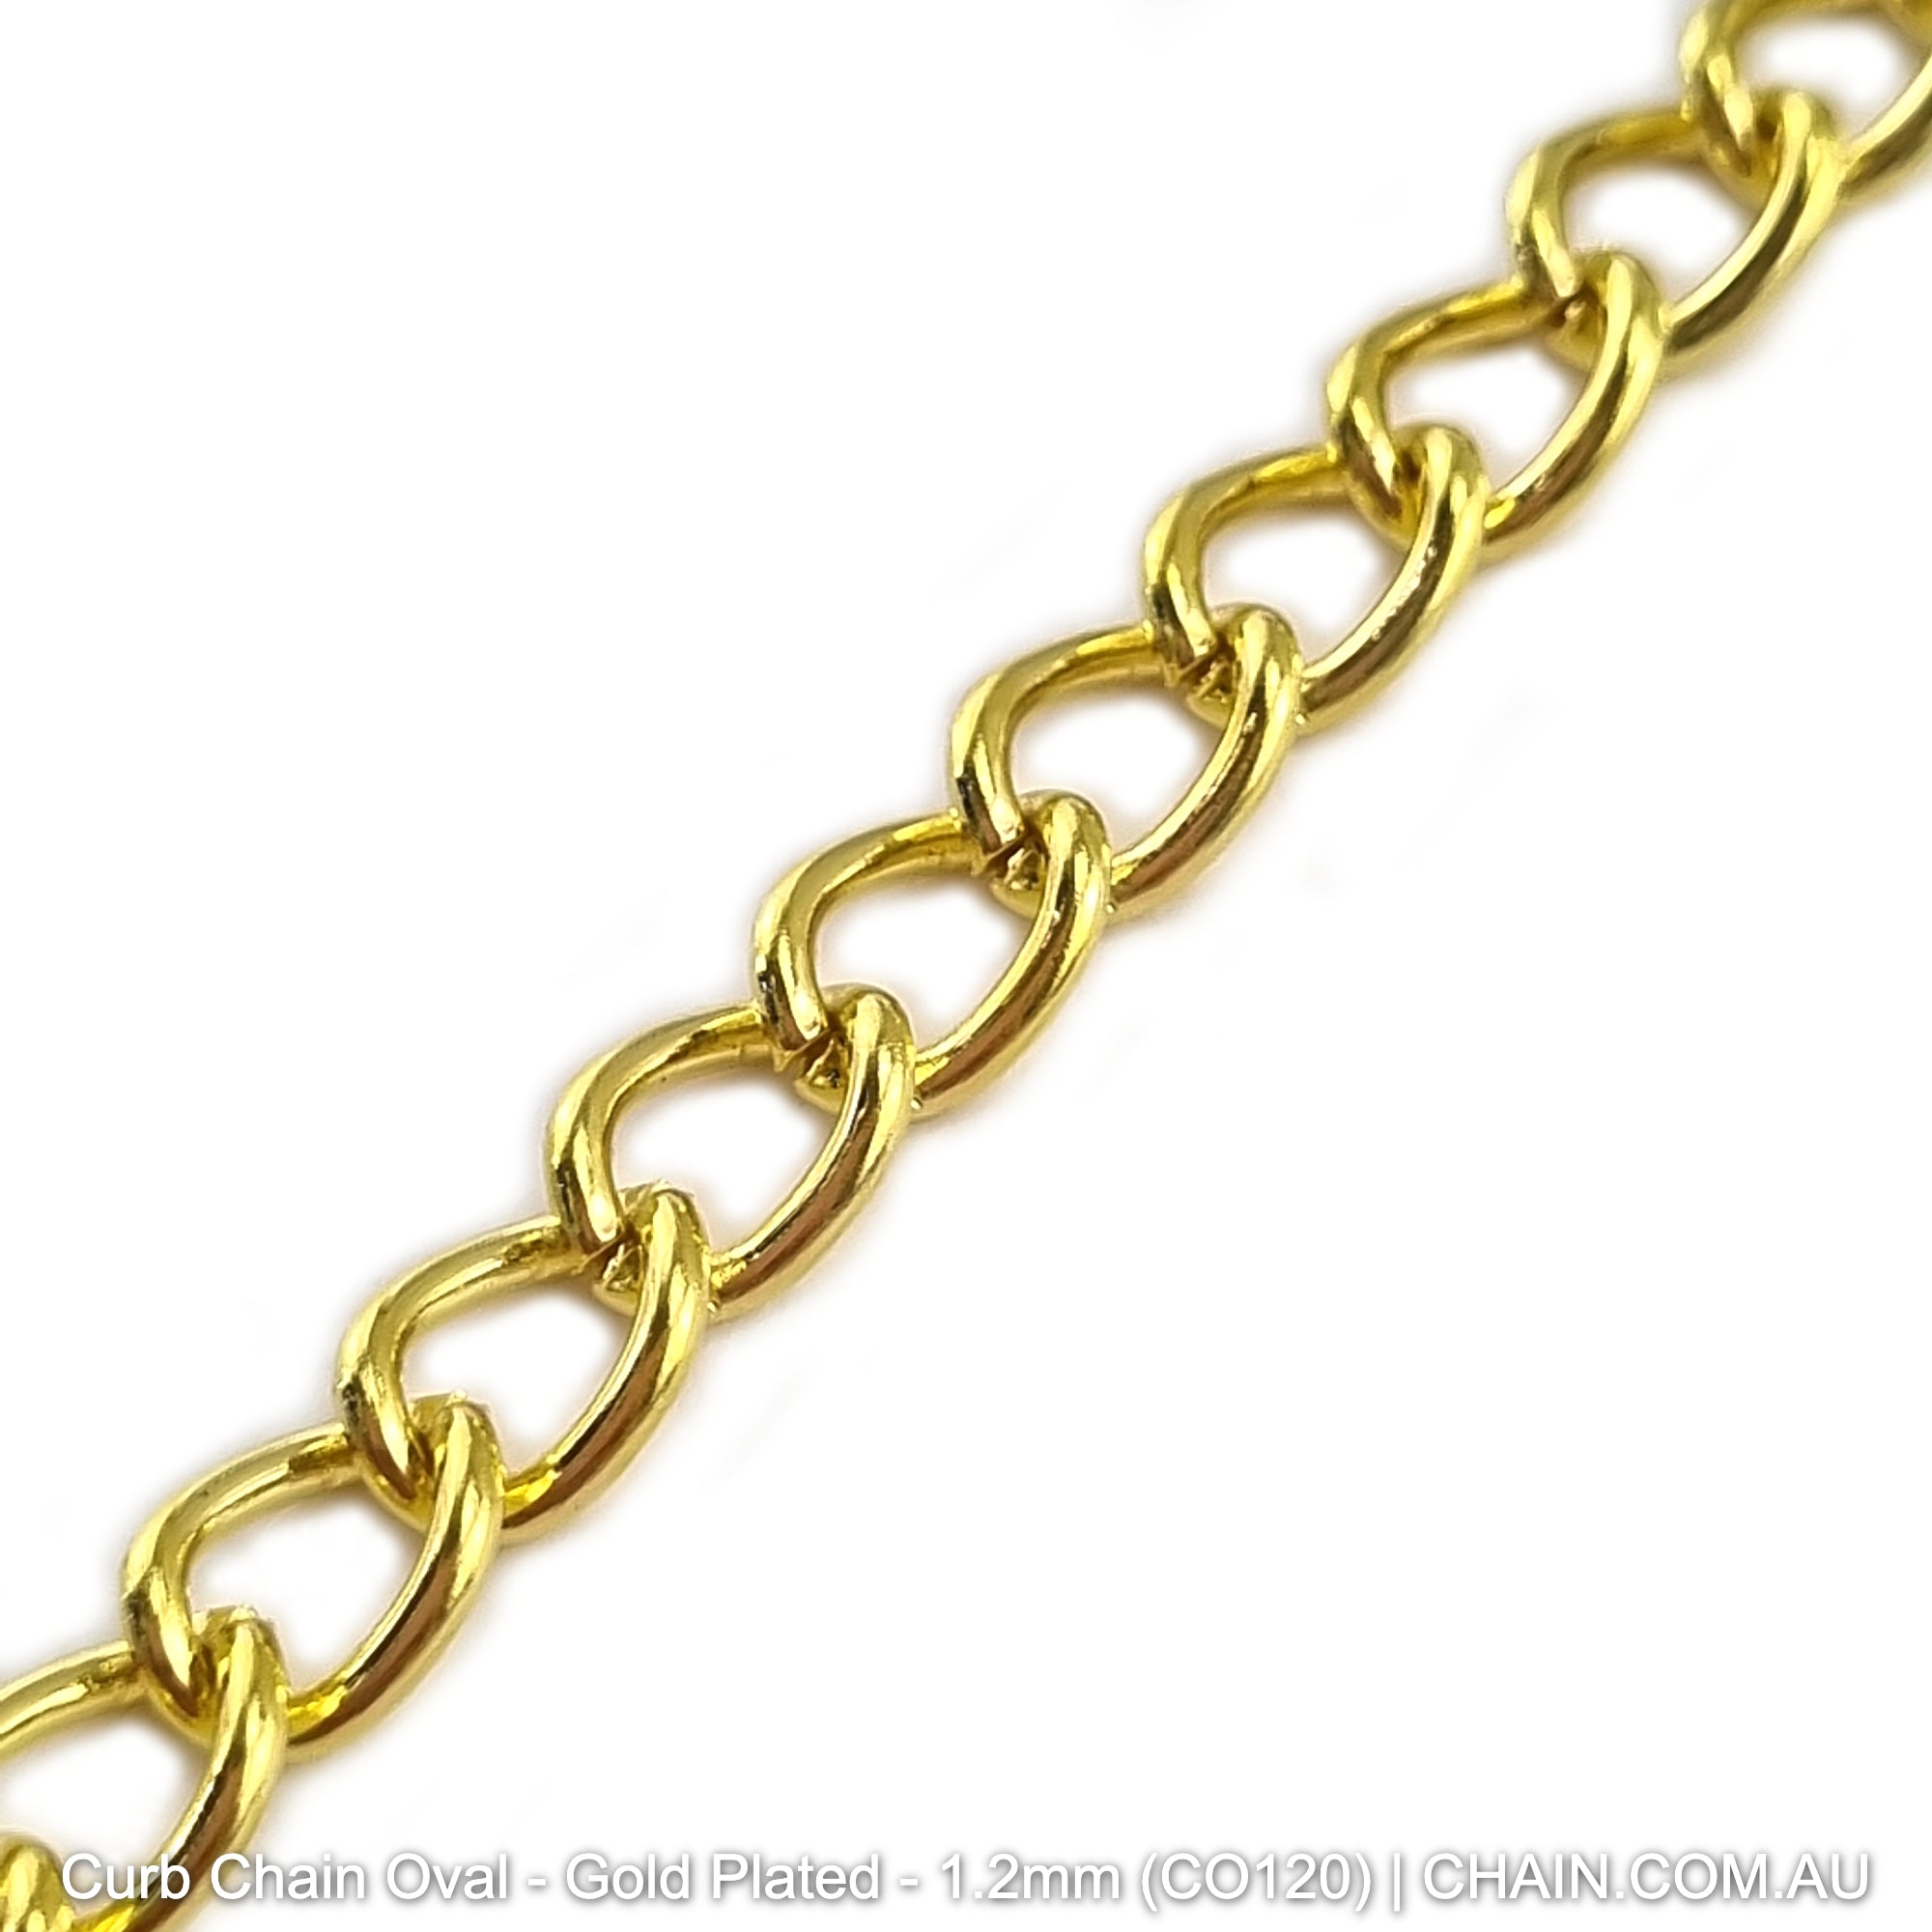 Oval Curb Chain in a Gold Plated Finish. Size: 1.2mm, CO120. Jewellery Chain, Australia wide shipping. Shop chain.com.au